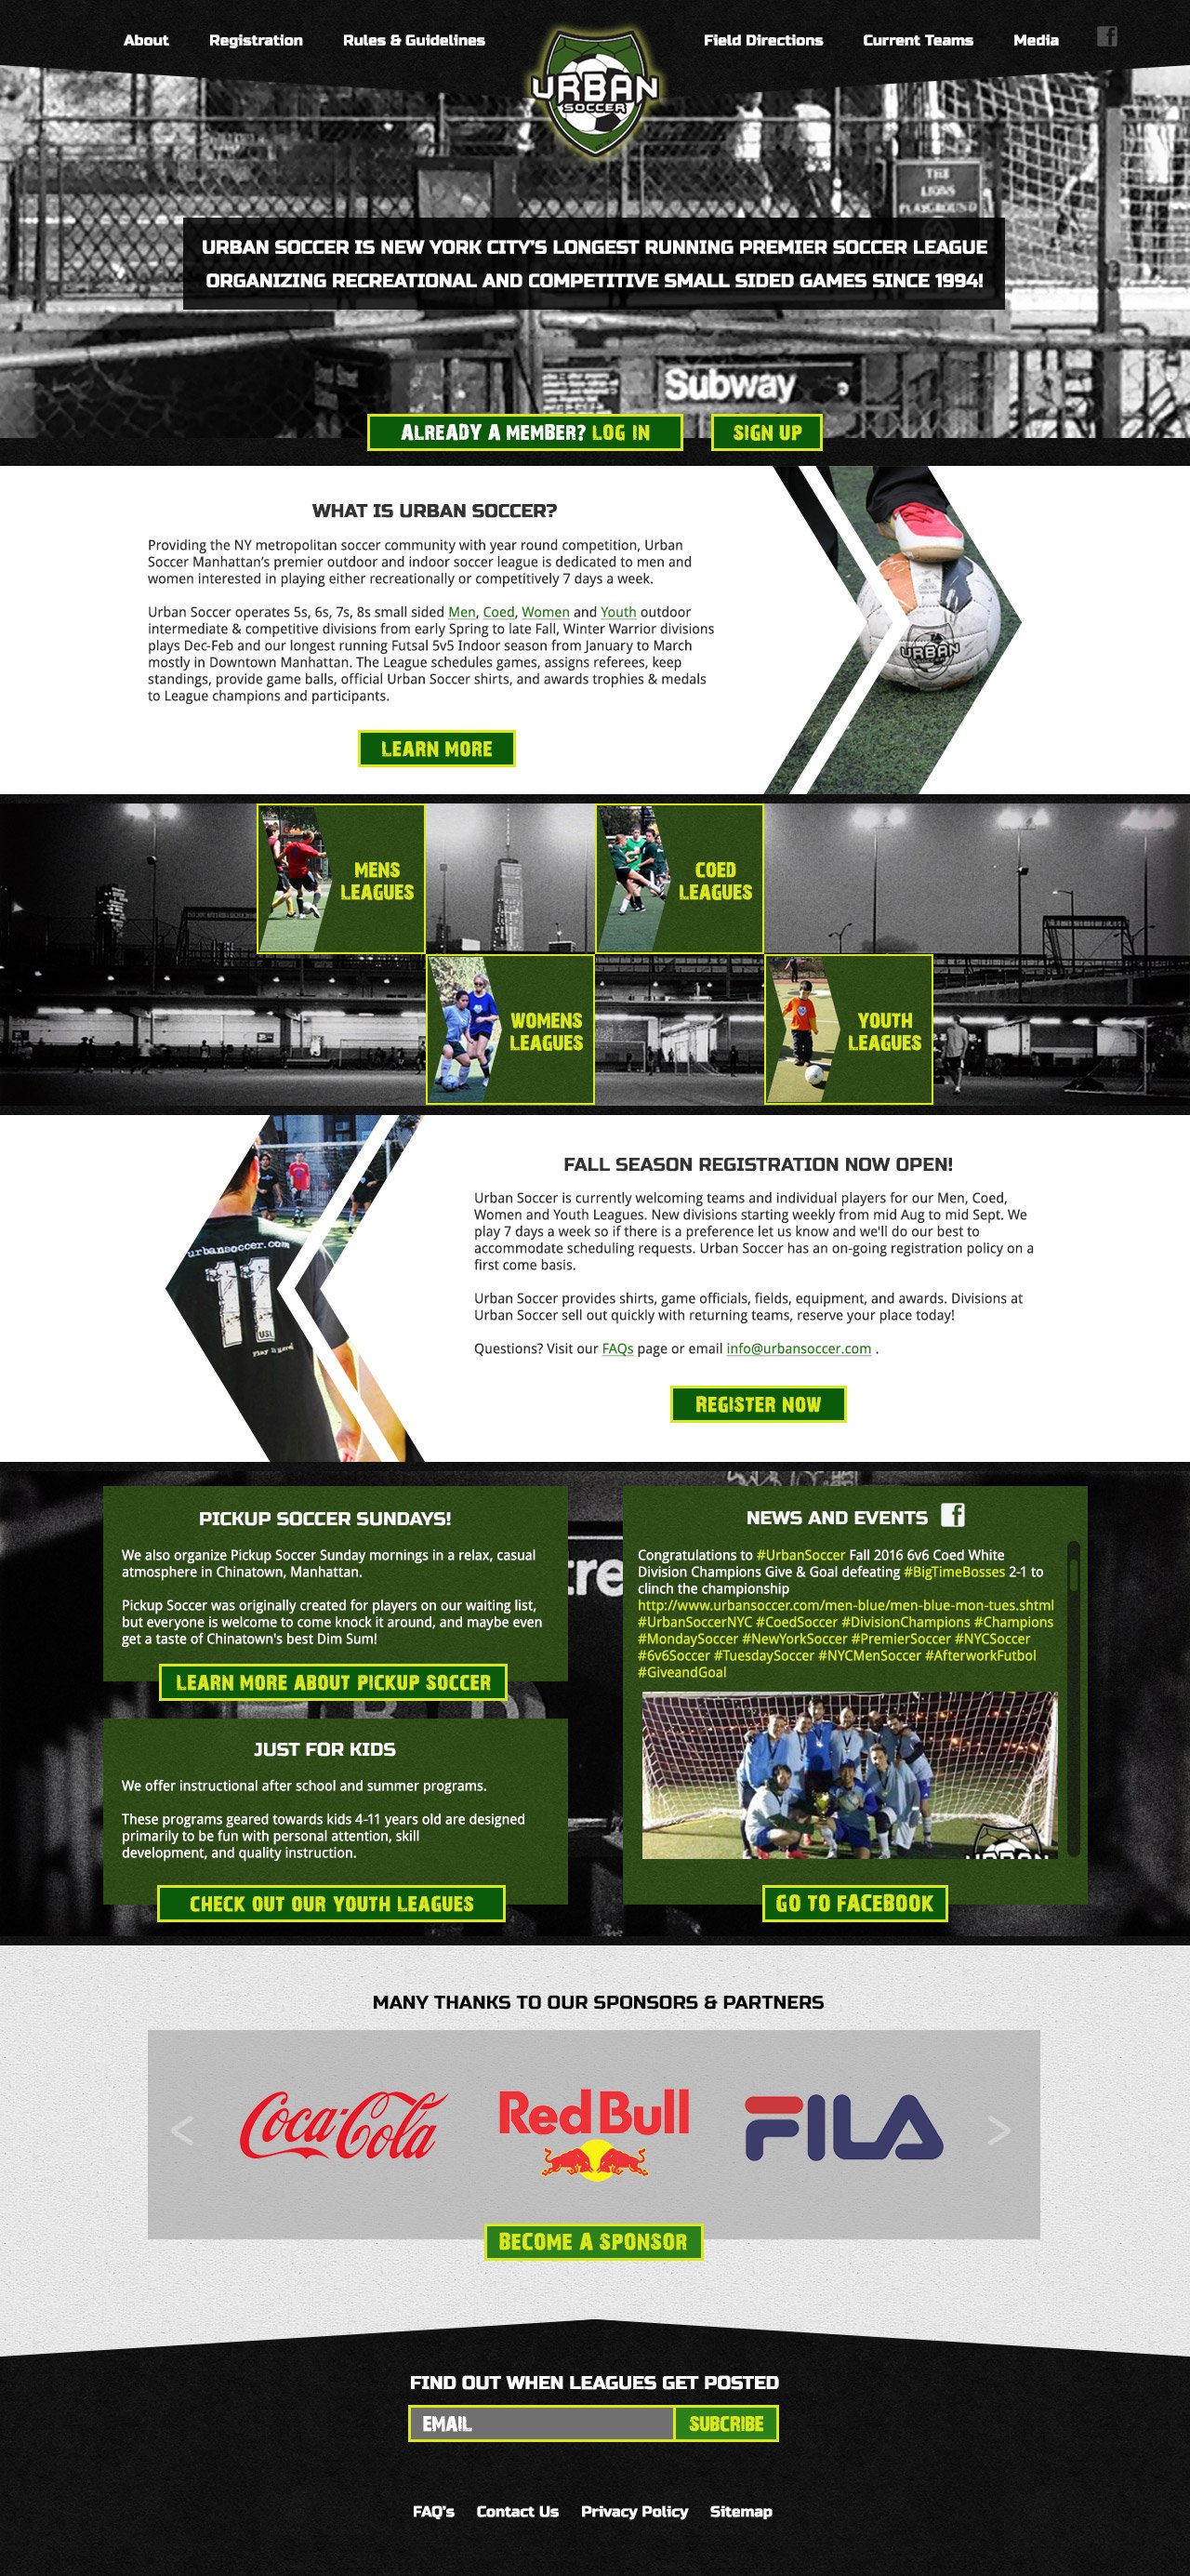 Urban Soccer NYC Home Page